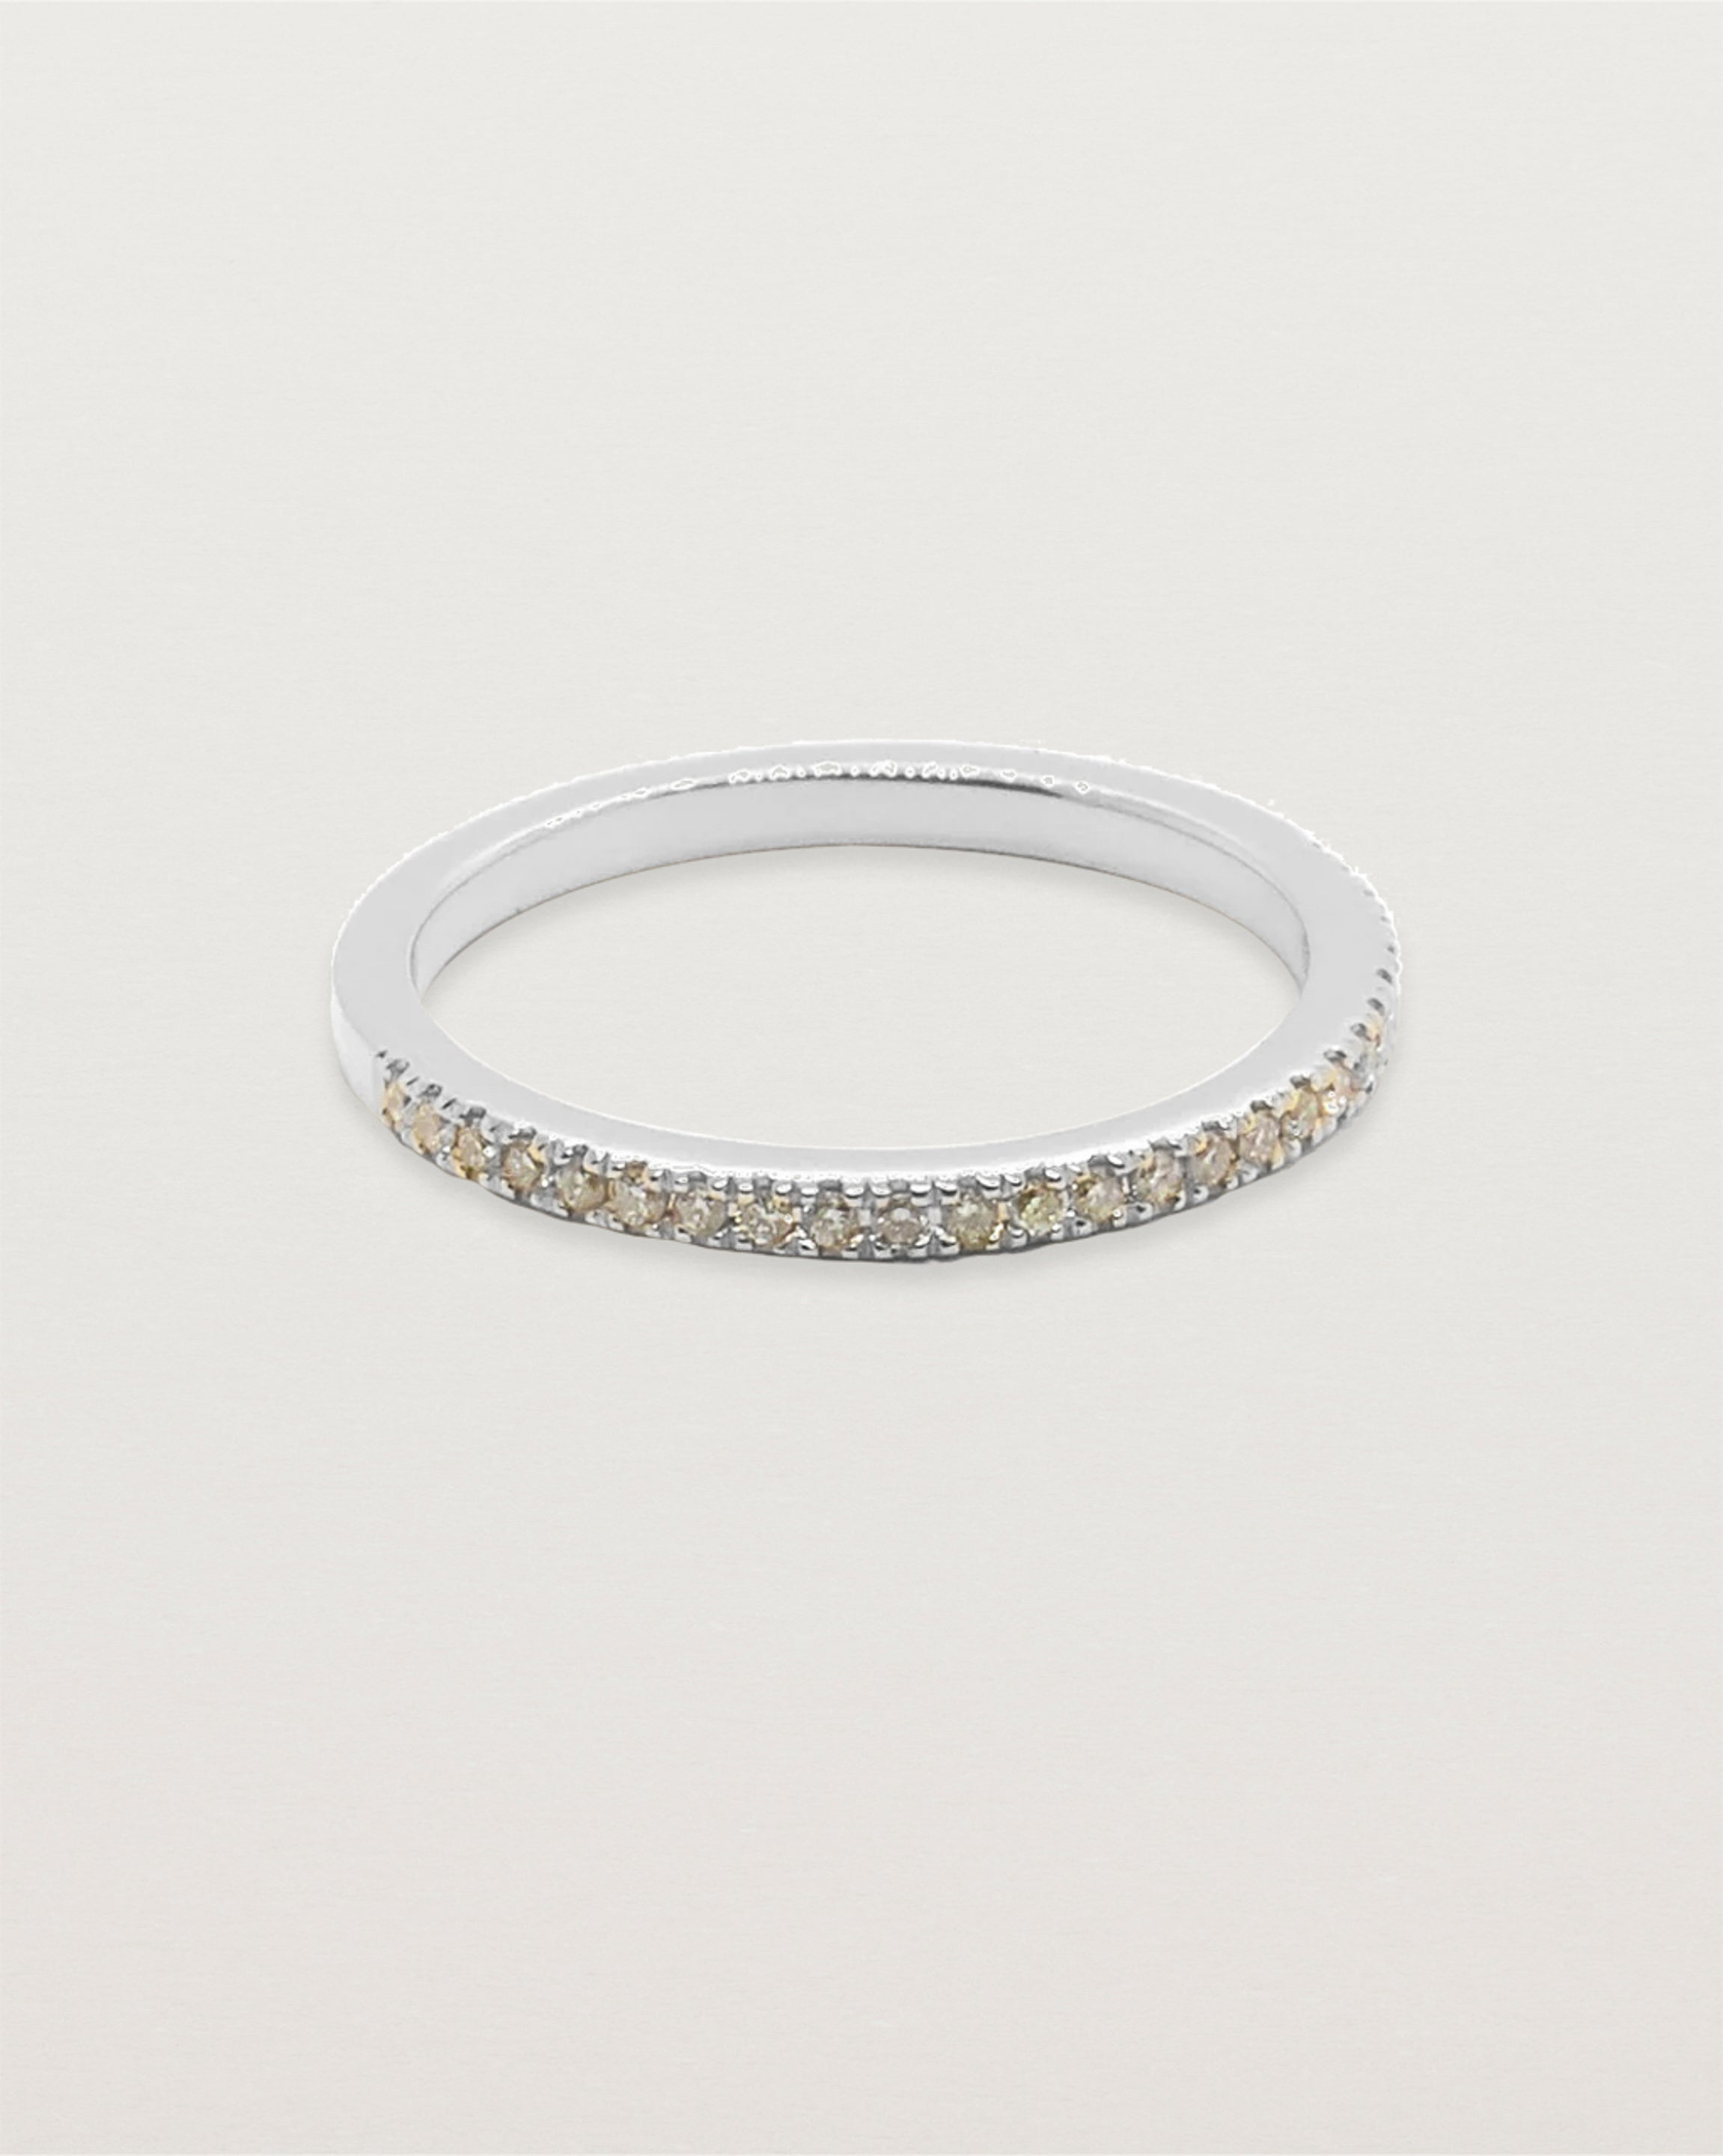 Front view of Annie band with champagne diamonds in white gold